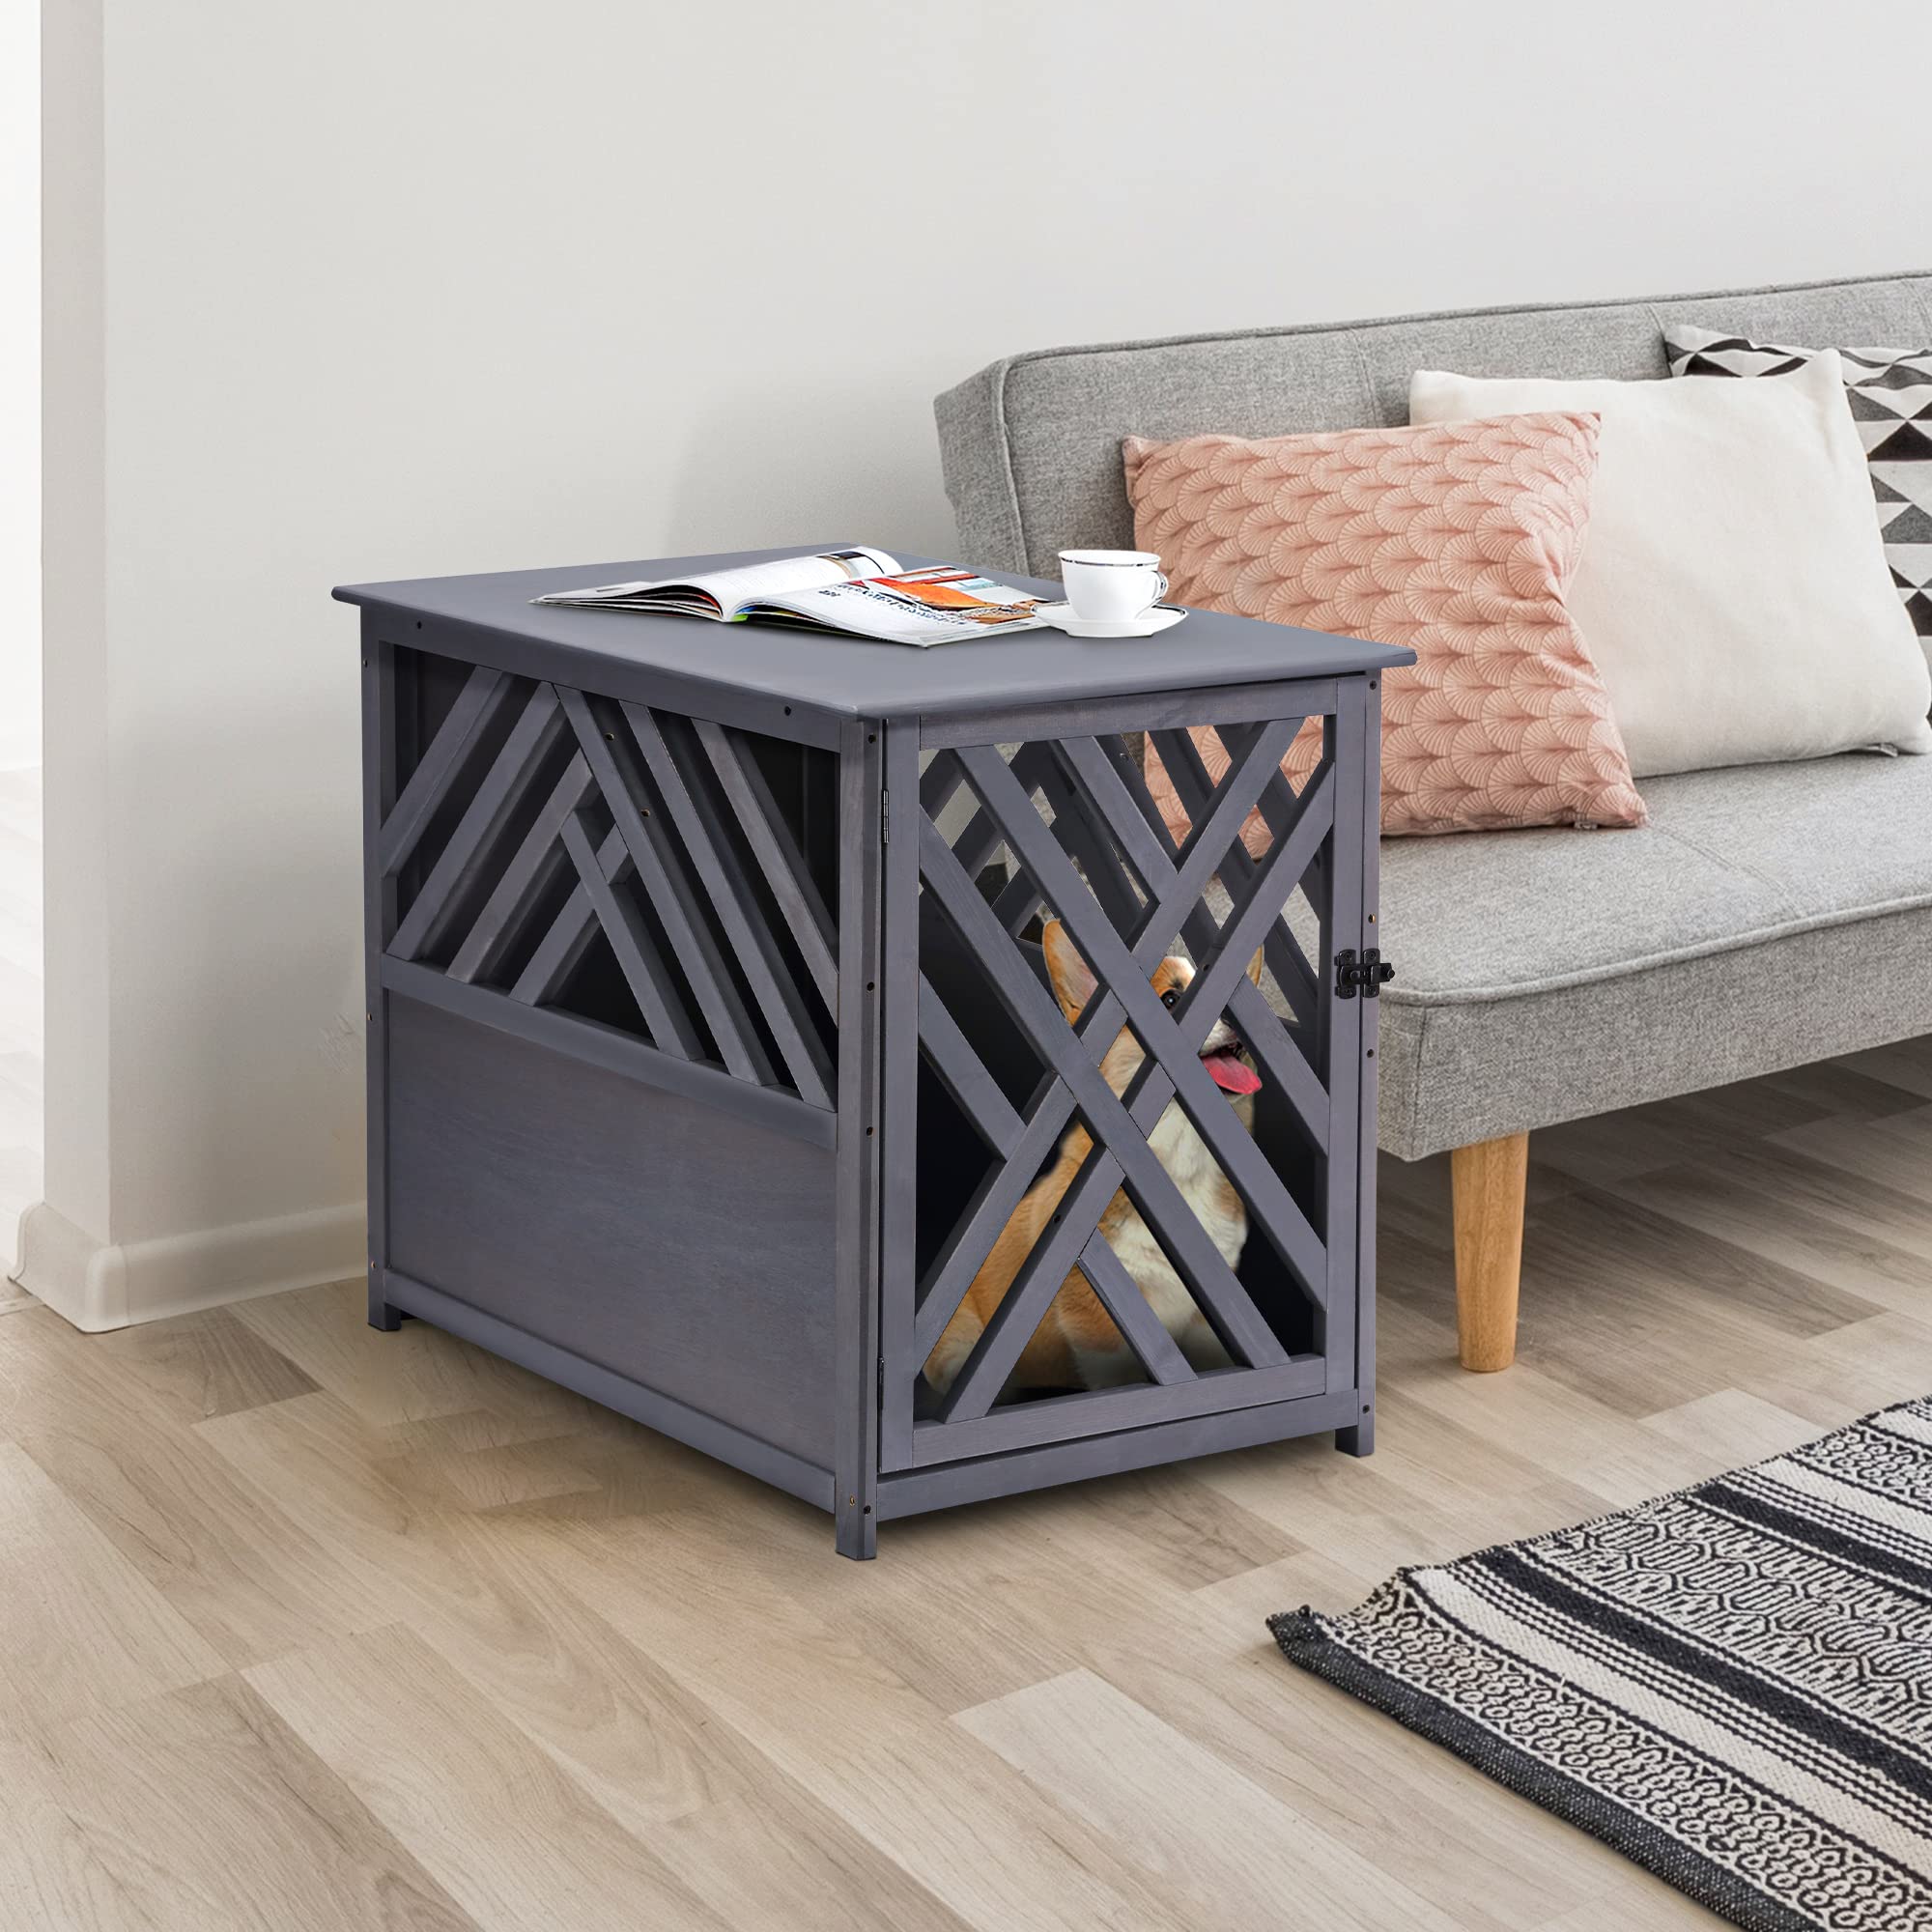 PawHut Furniture Style Wood Dog Crate End Table Decorative Dog Cage Kennel Lattice Night Stand with Lockable Door, Grey